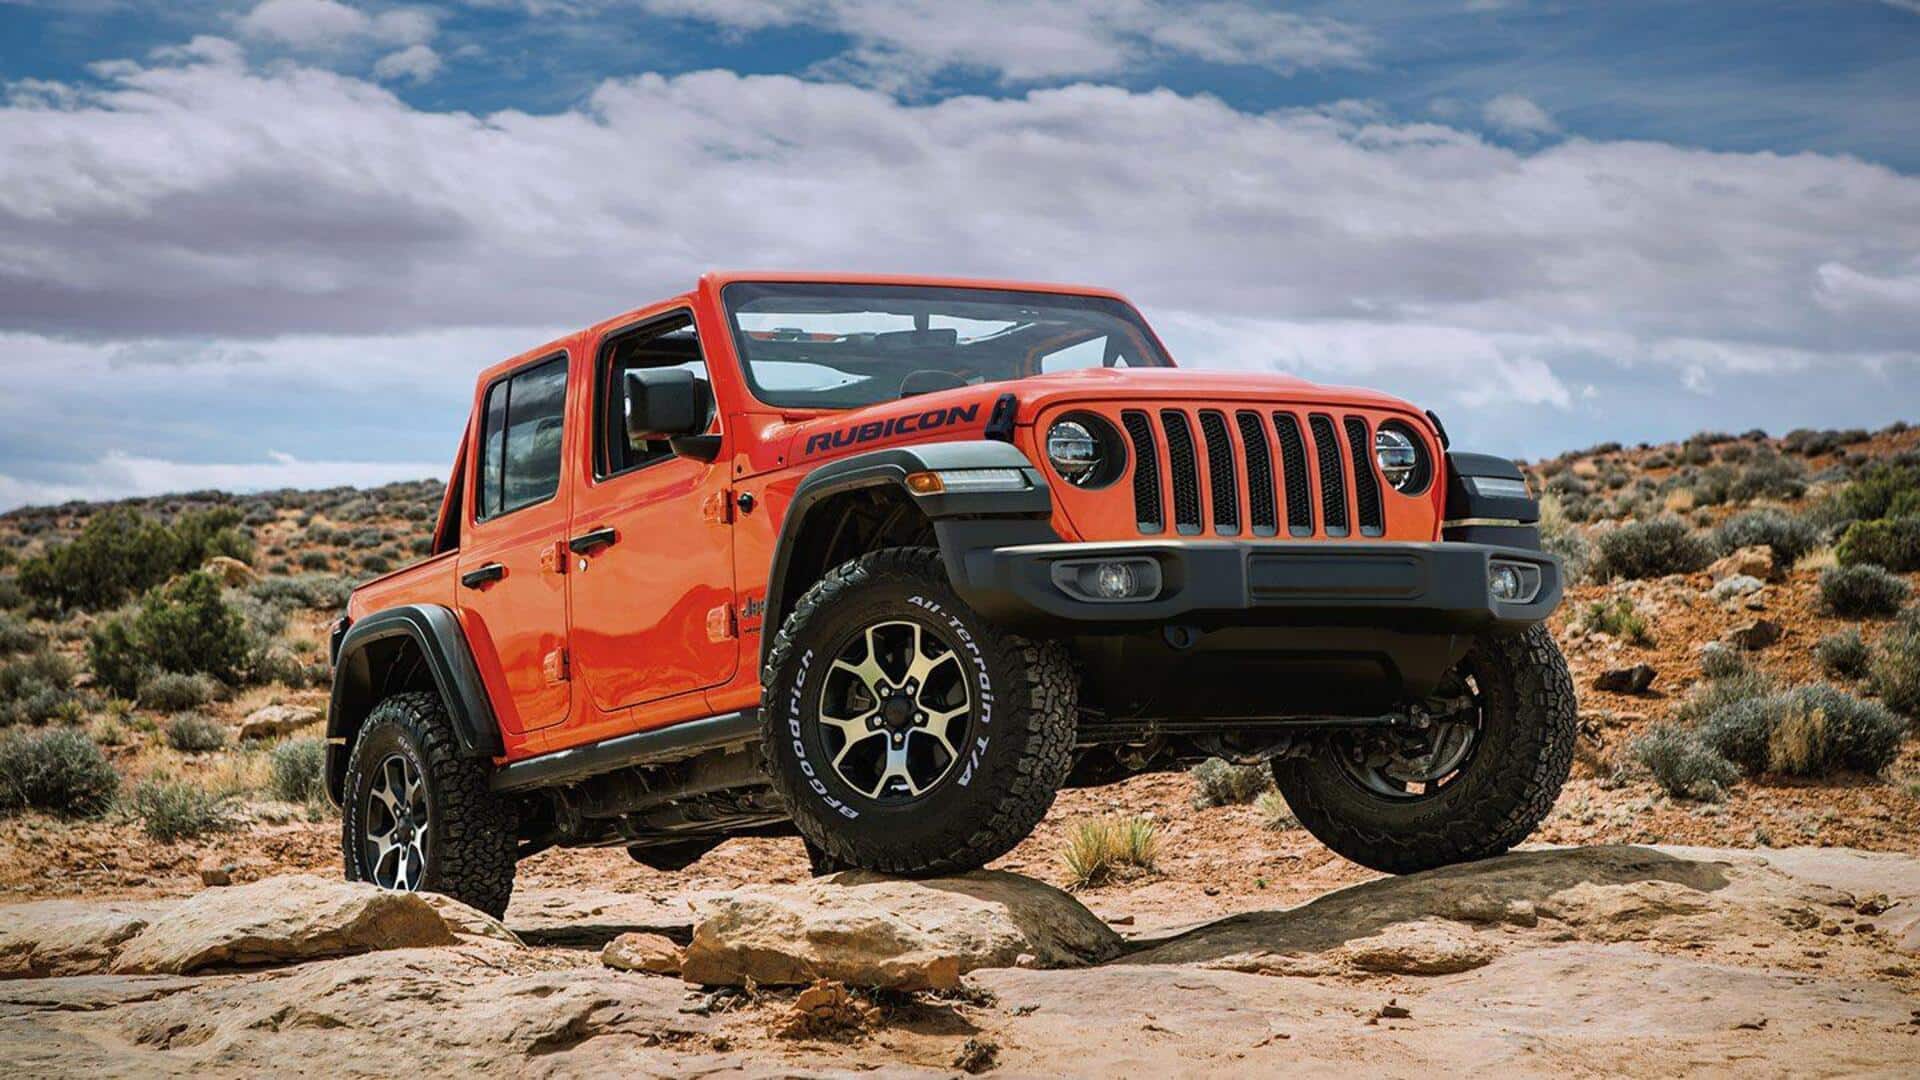 Jeep plans to launch Thar-rivaling compact Wrangler SUV in India